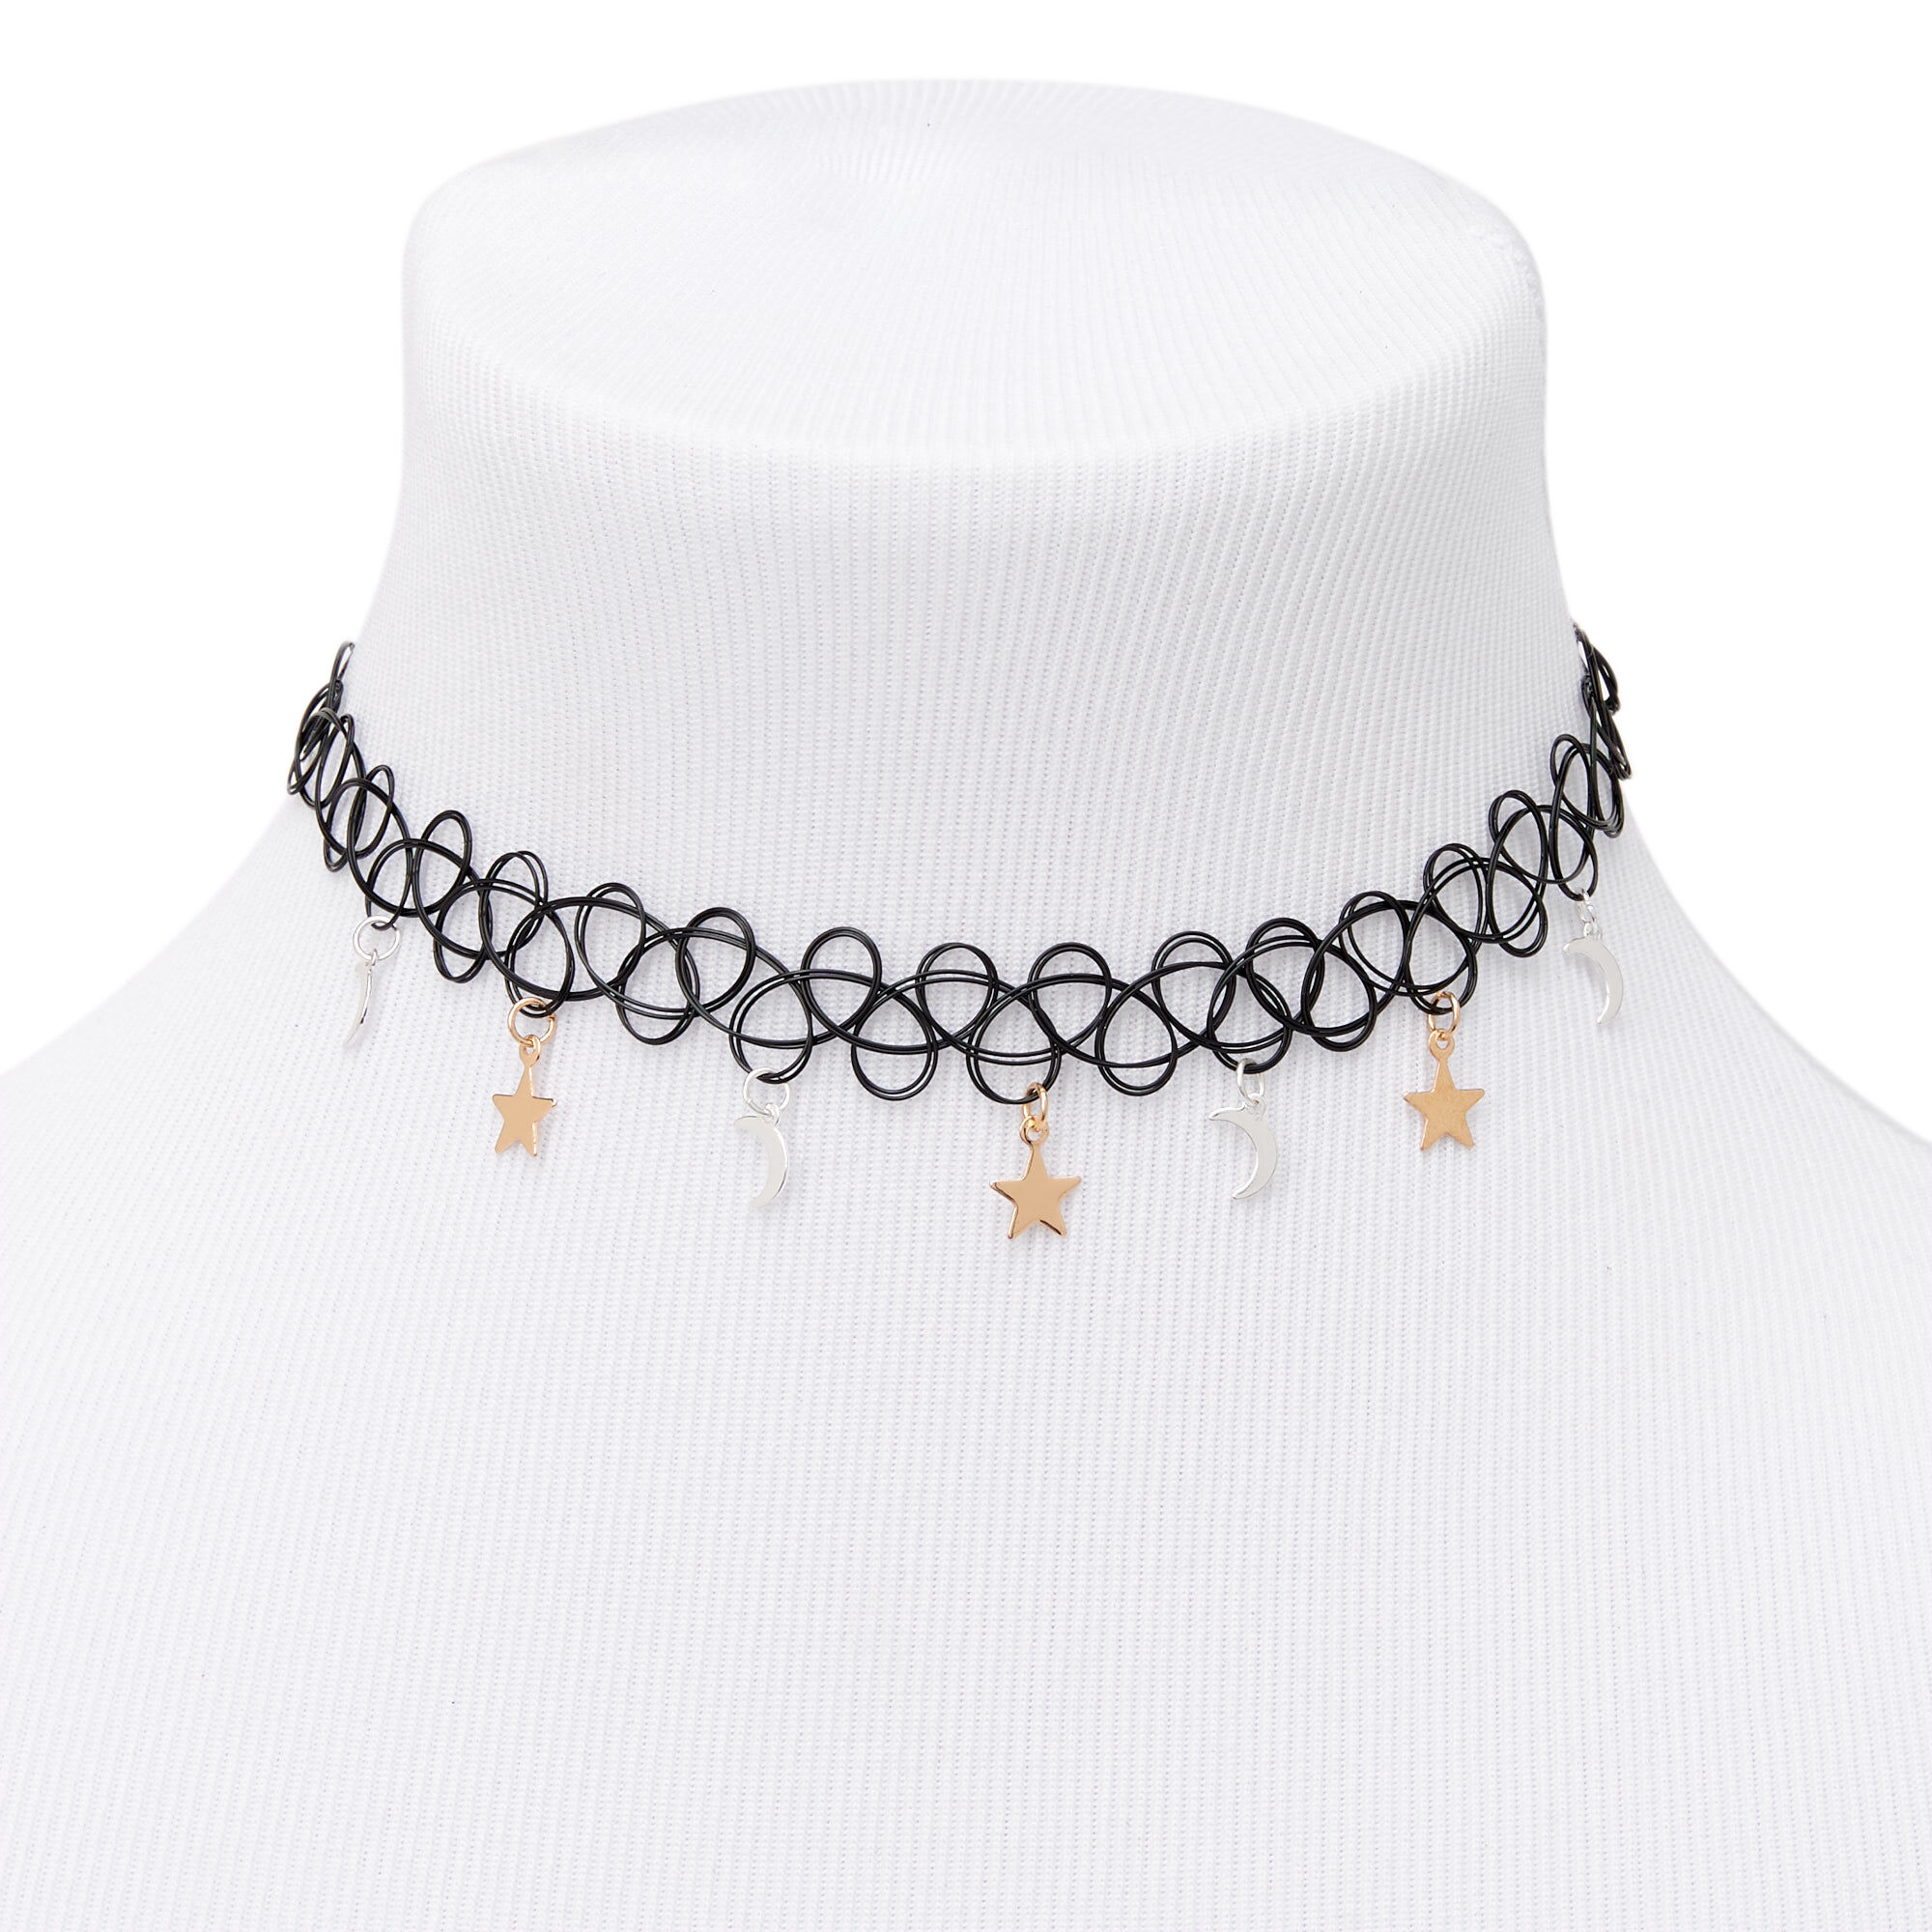 Mixed Metal Celestial Tattoo Choker Necklace | Icing US